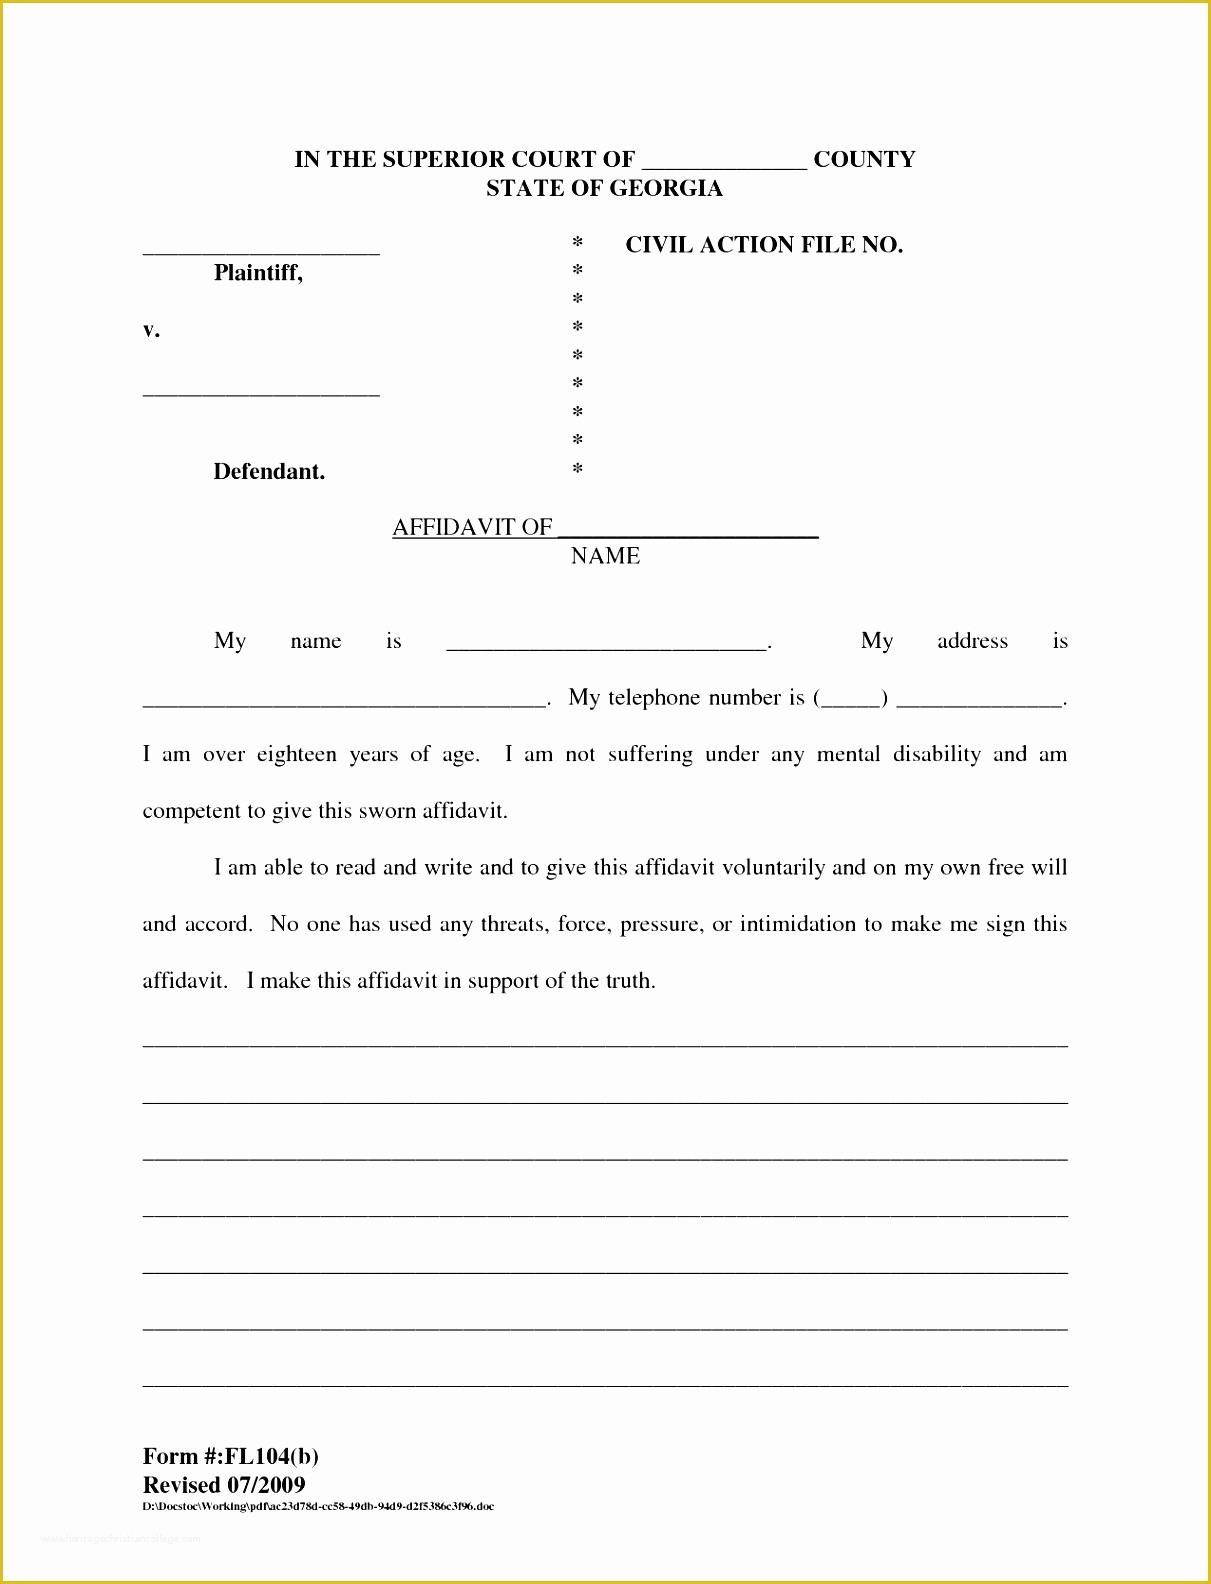 Microsoft Word Templates Legal Documents